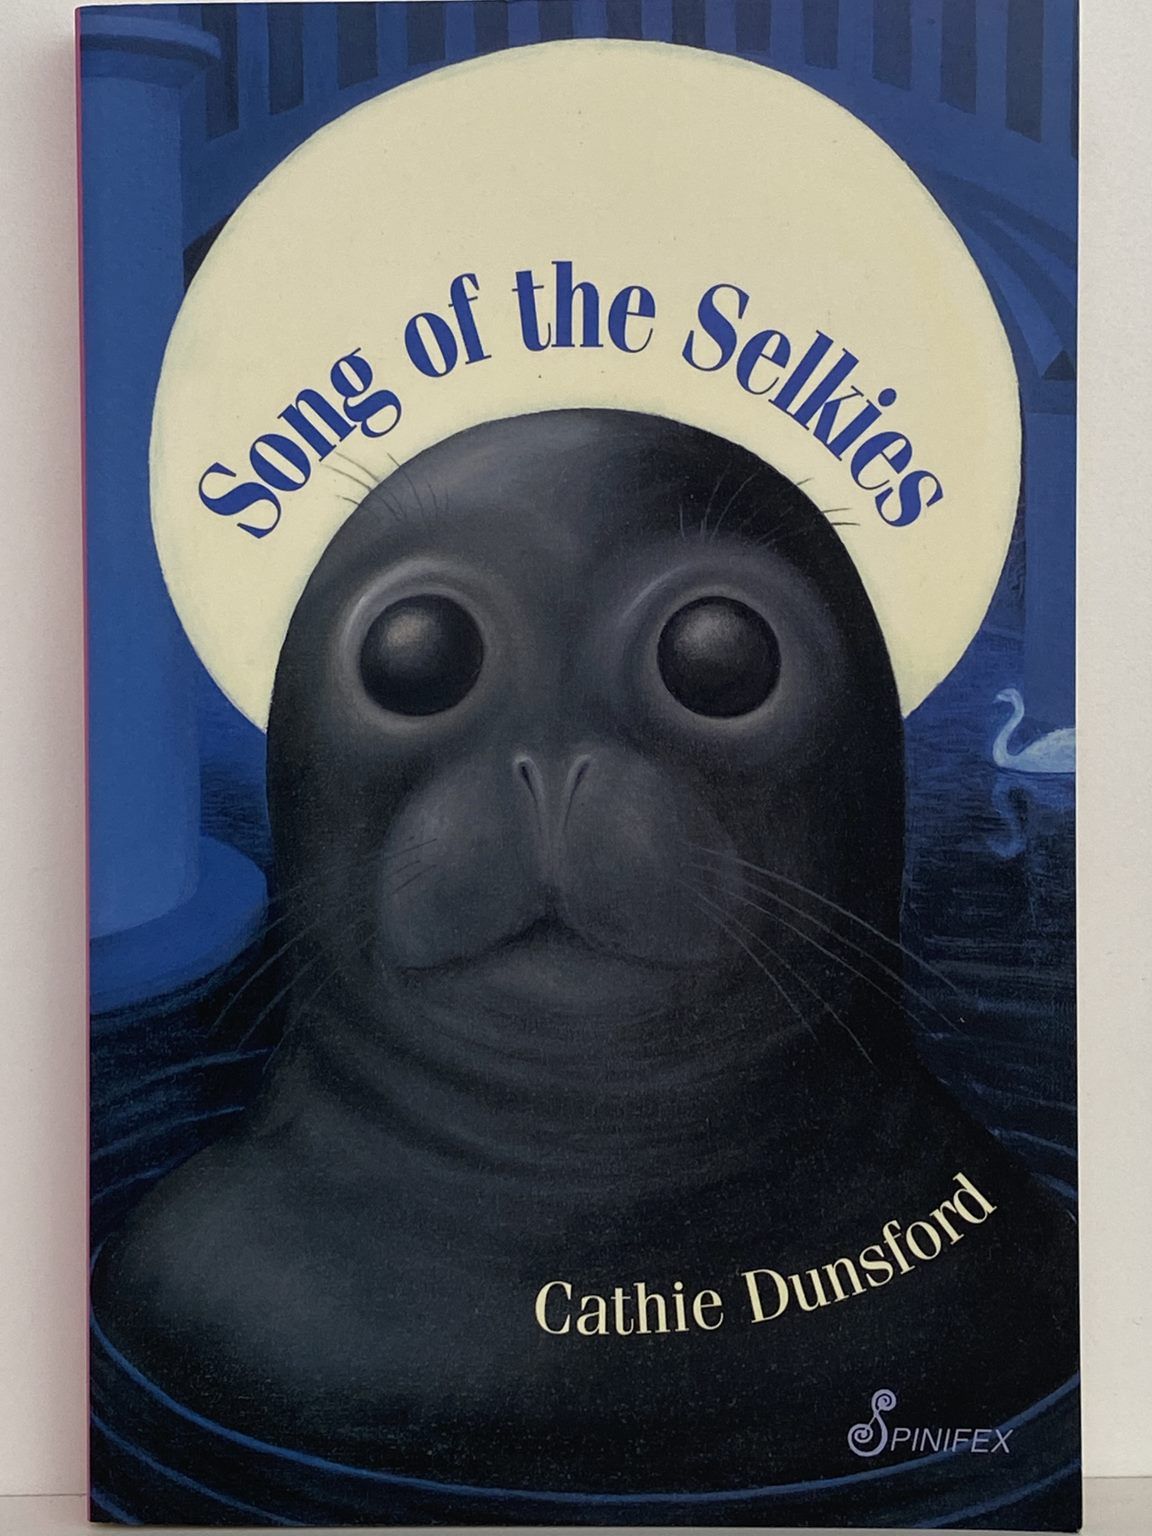 SONG of the SELKIES